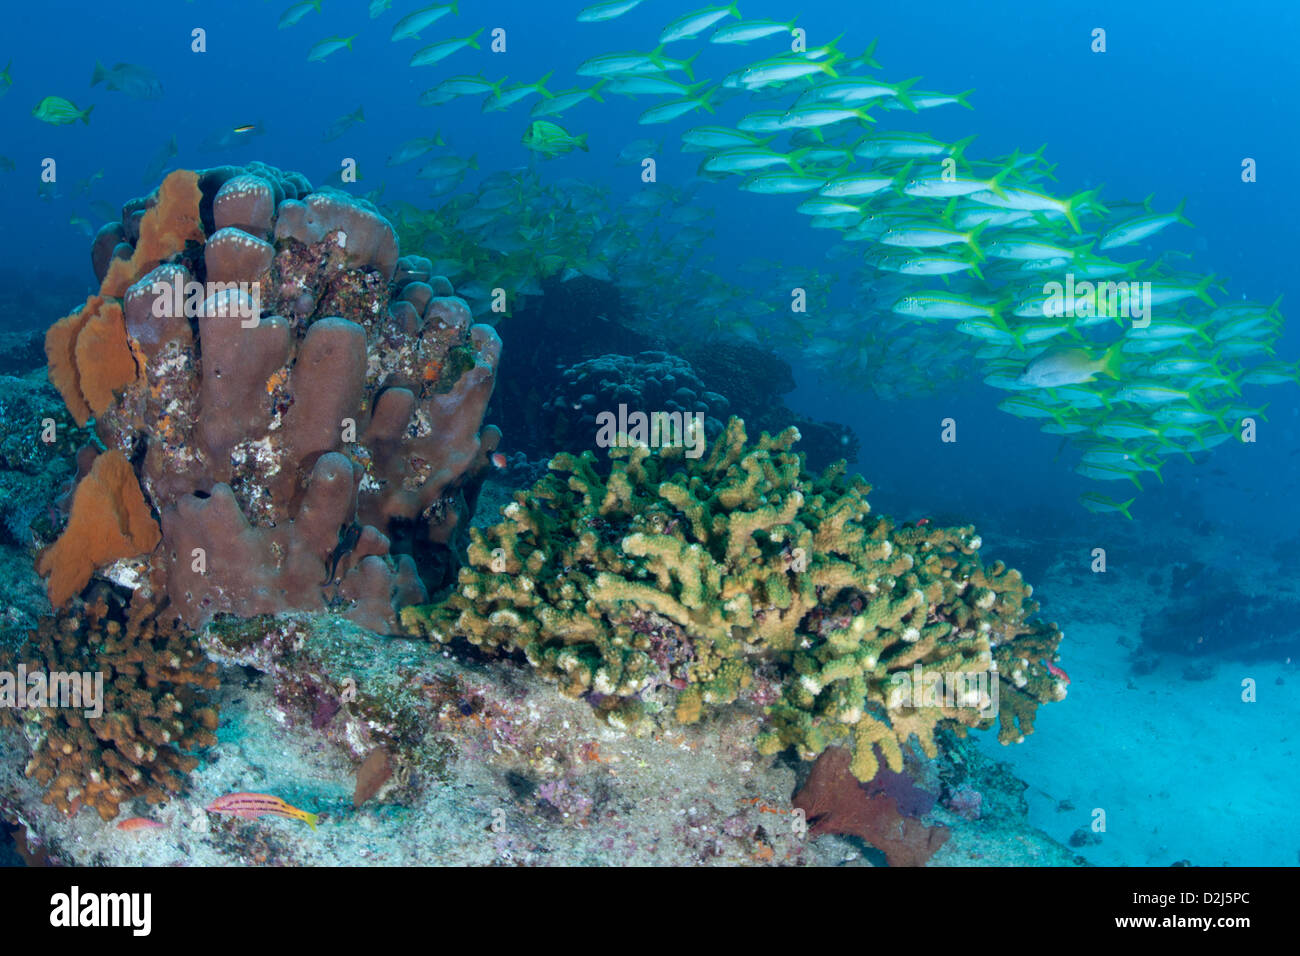 A large school of yellowtail snapper above a healthy coral reef at Cabo Pulmo National Marine Park, Mexico. Stock Photo